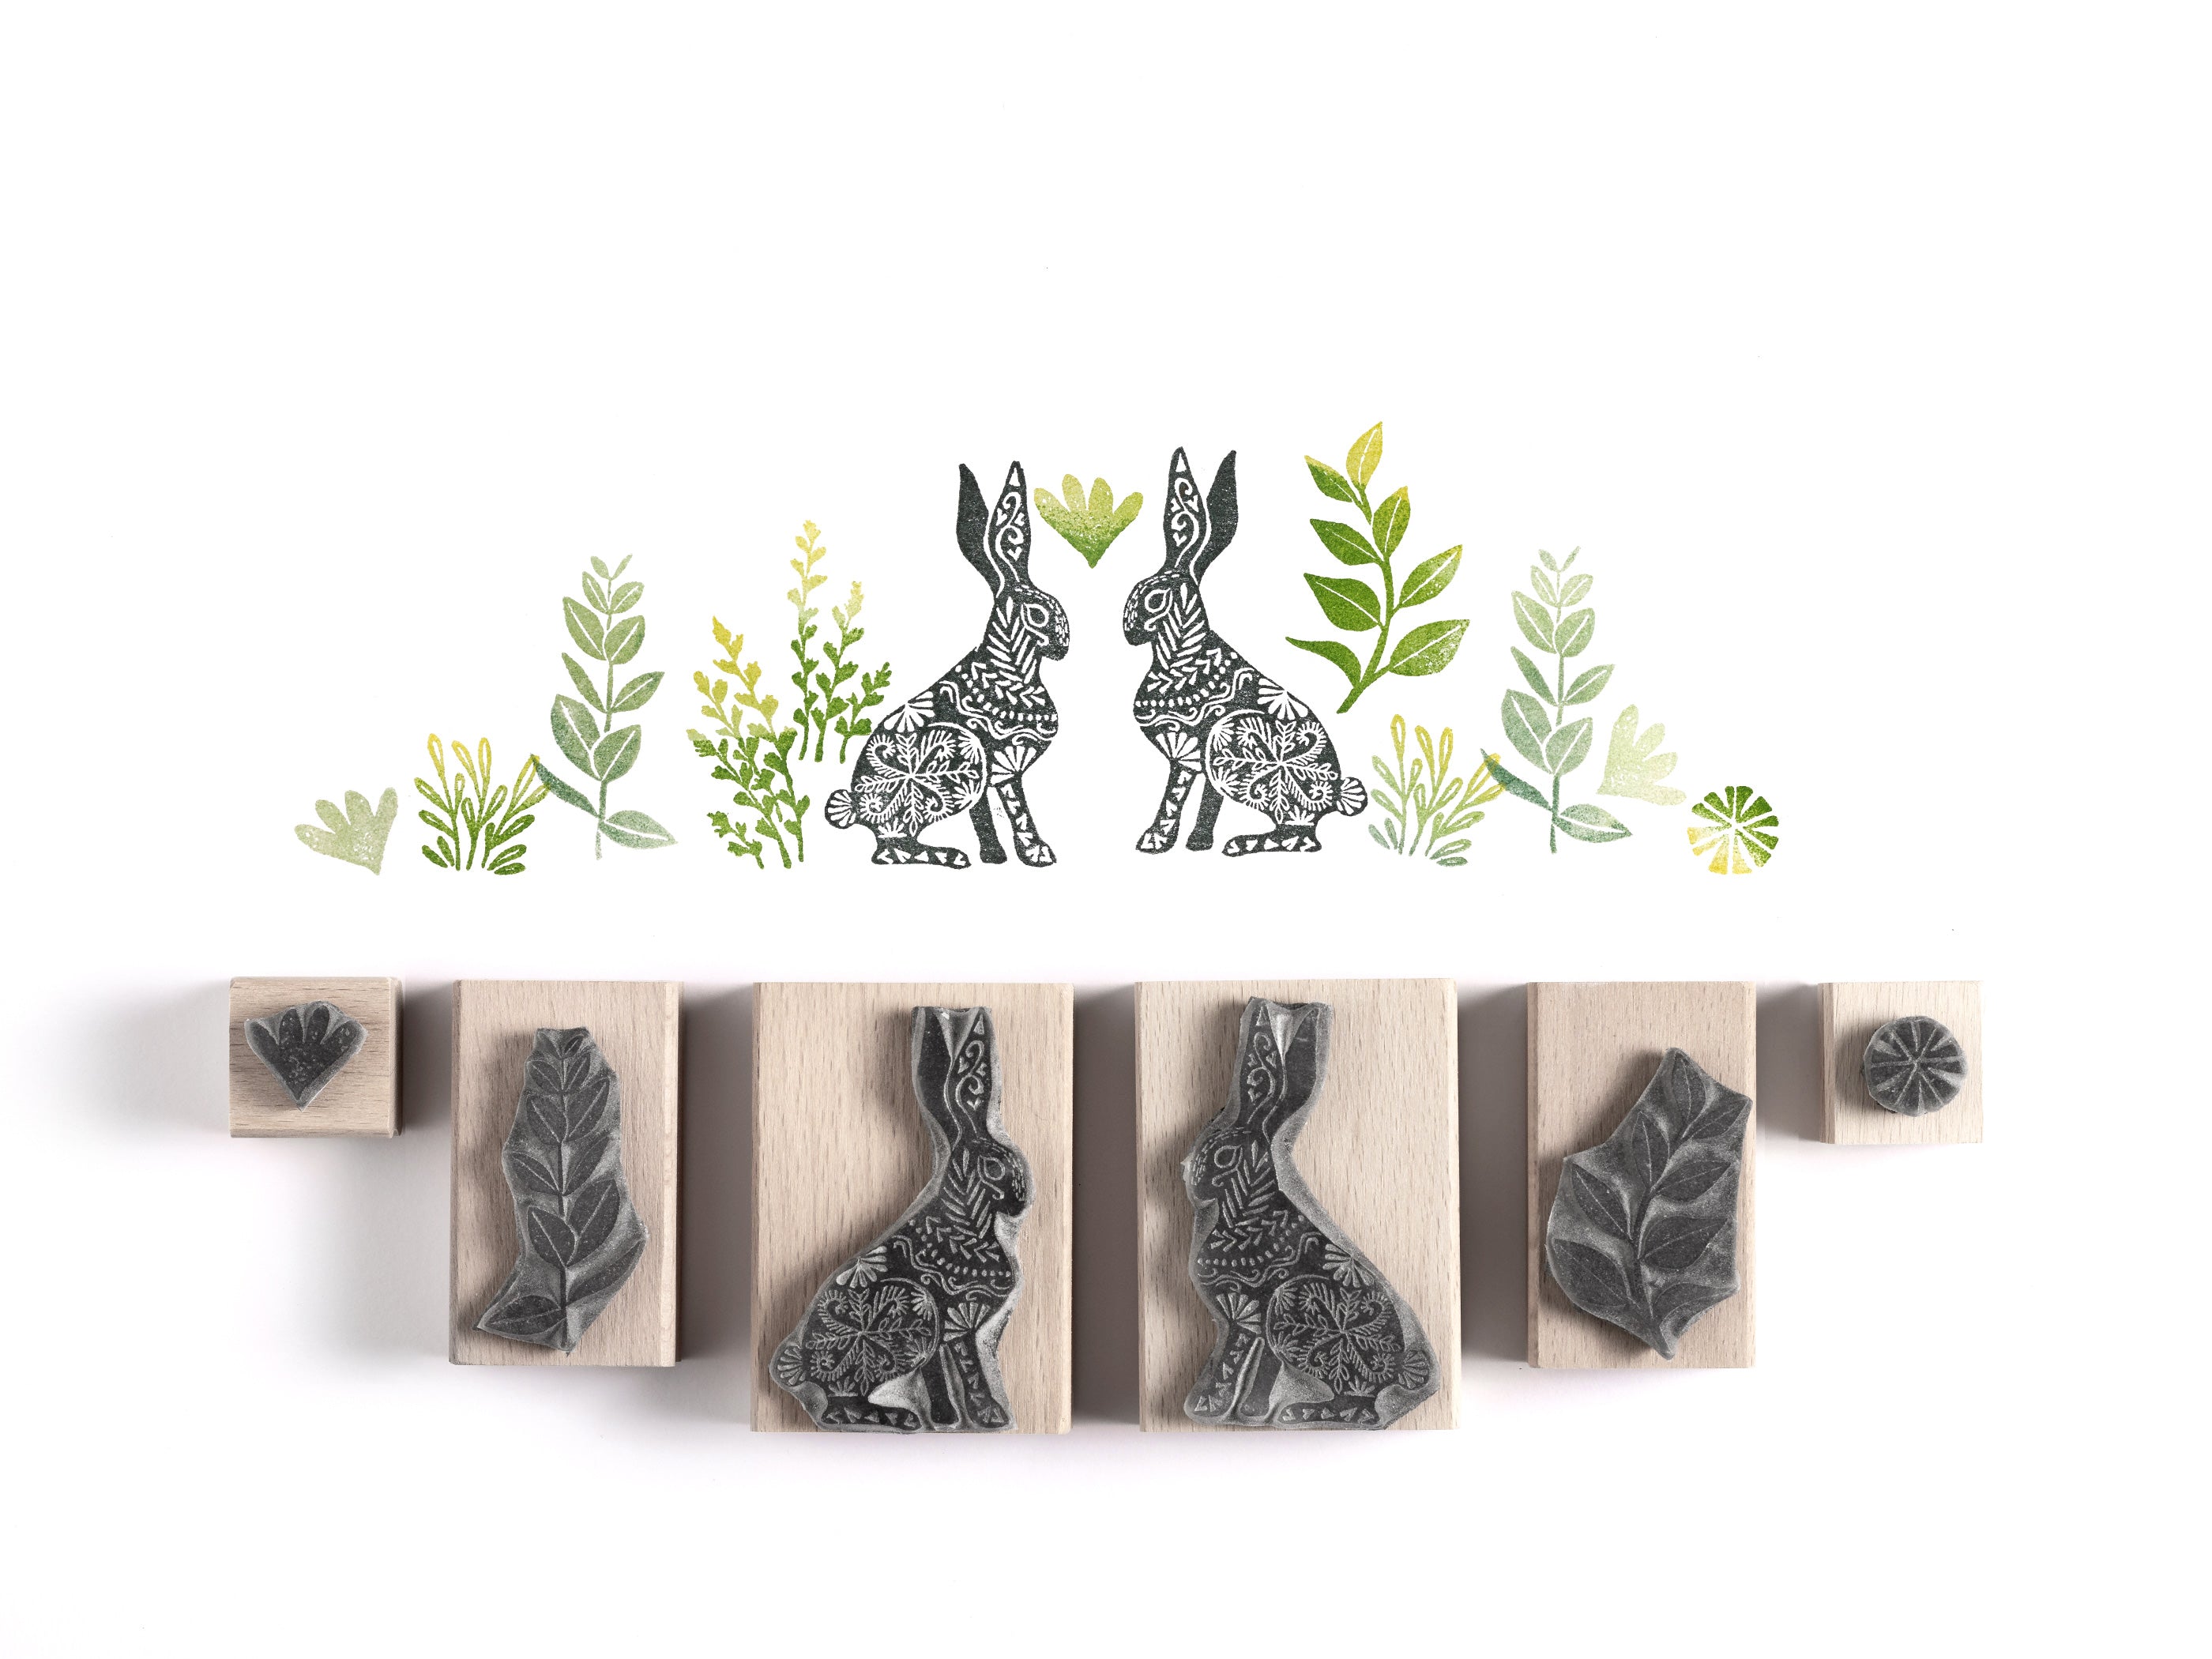 Hare Rubber Stamp, Easter Bunnies, Rabbit Stamps, Leaf and Foliage Stamps - Noolibird